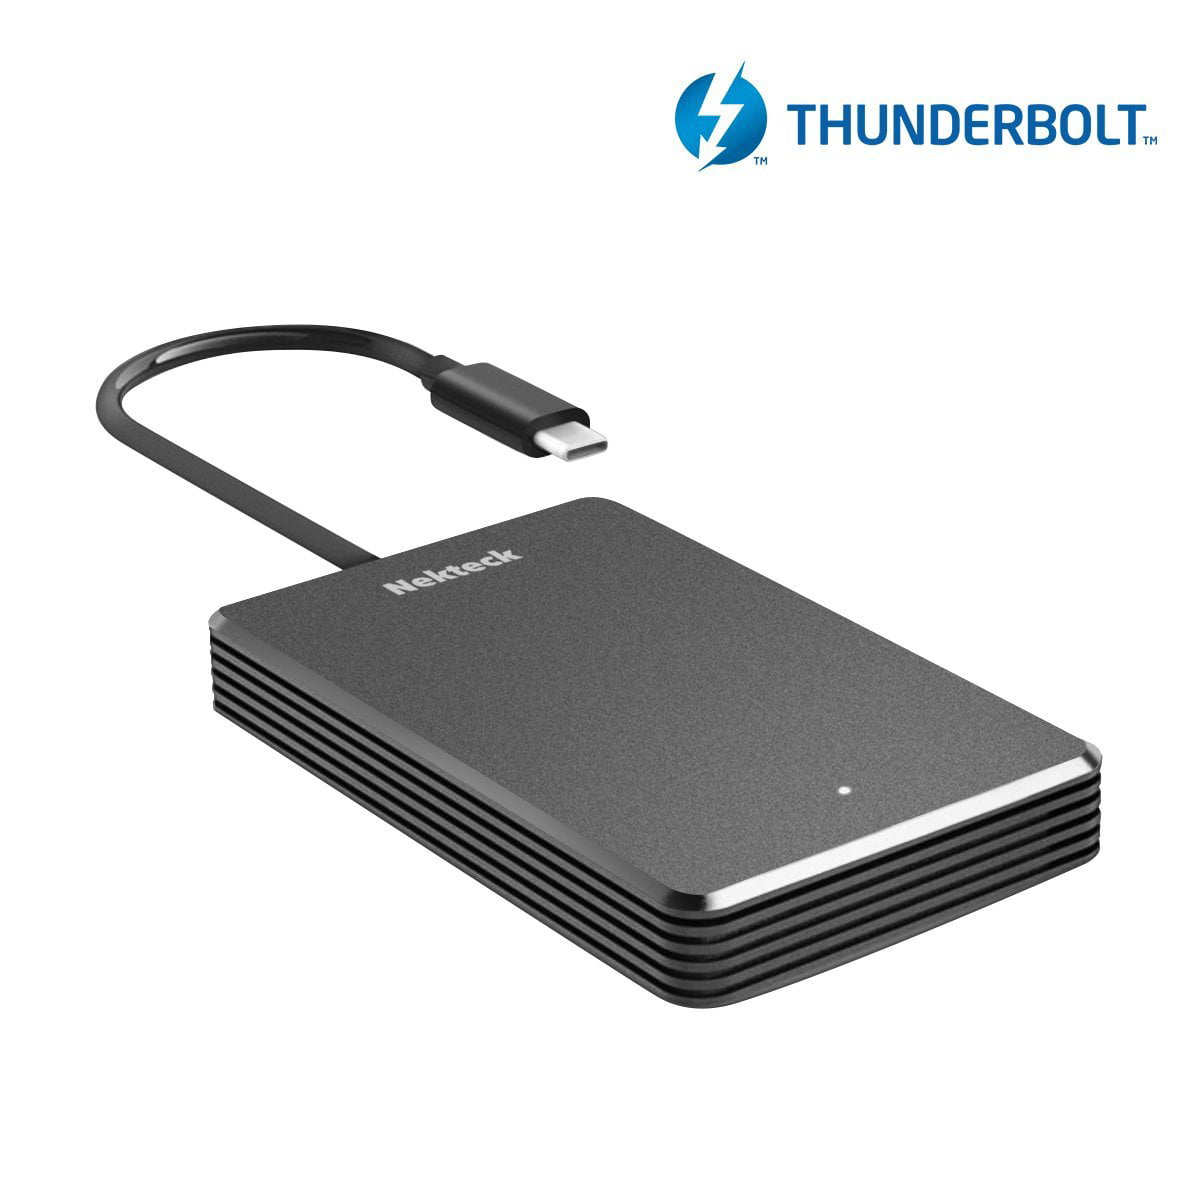 Tremble politi Droop Certified] Nekteck 480GB Thunderbolt 3 SSD NVME Hard Drive, External Hard  Disk Speed Up to 2300 MB/s Read (Not Compatible with USB-C) - Walmart.com